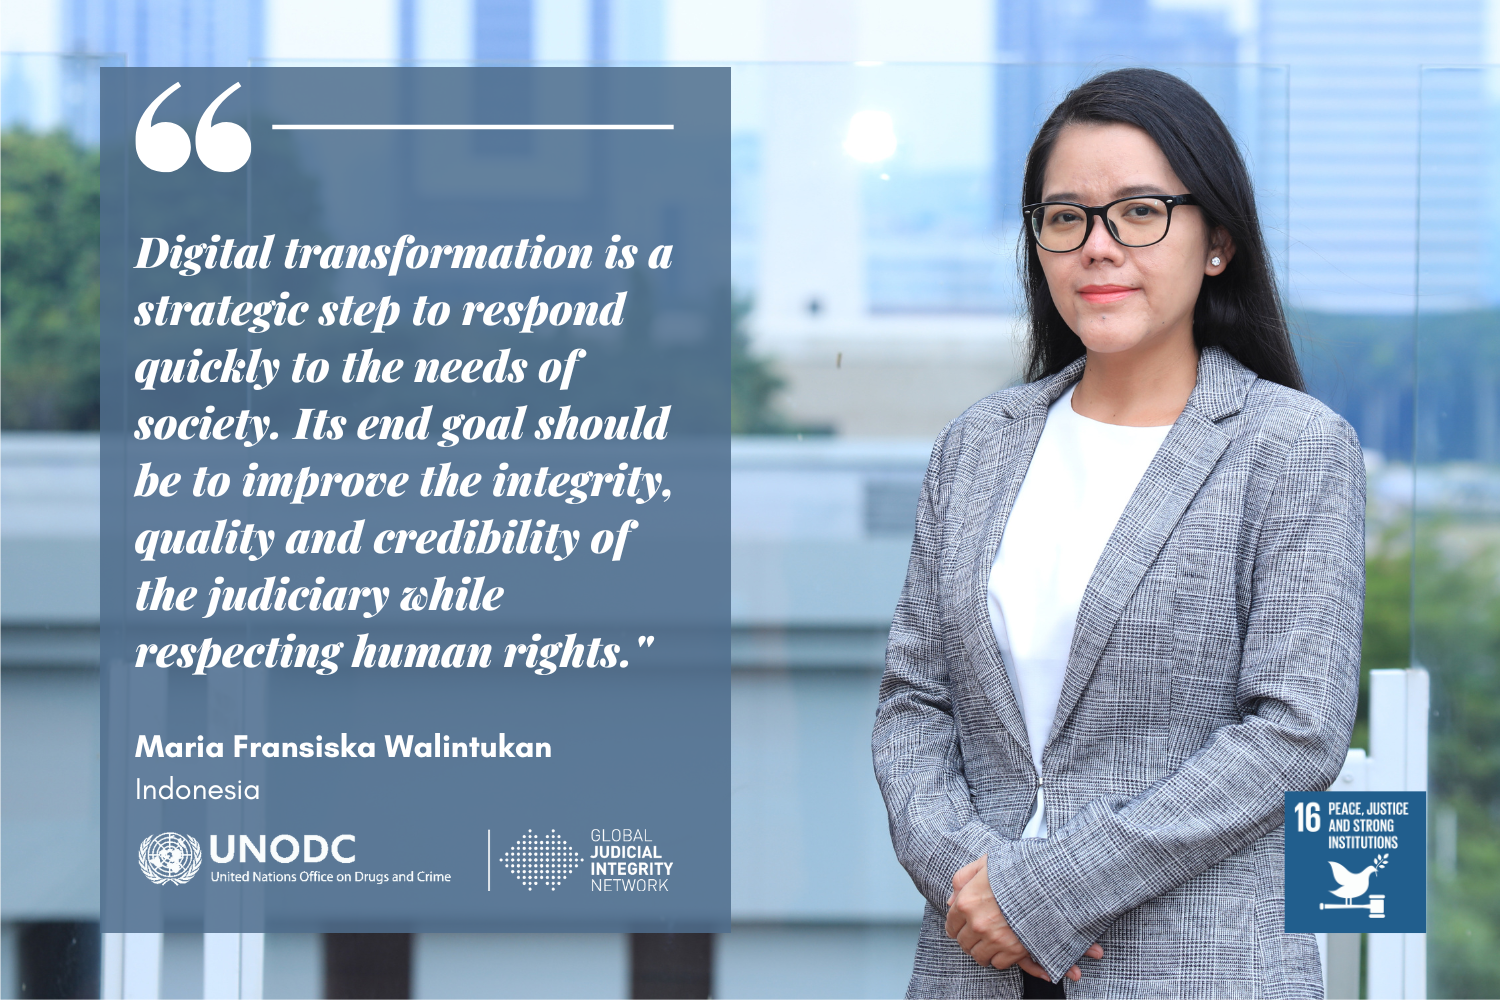 Digital Transformation and New Technologies: Lessons Learned from Indonesia